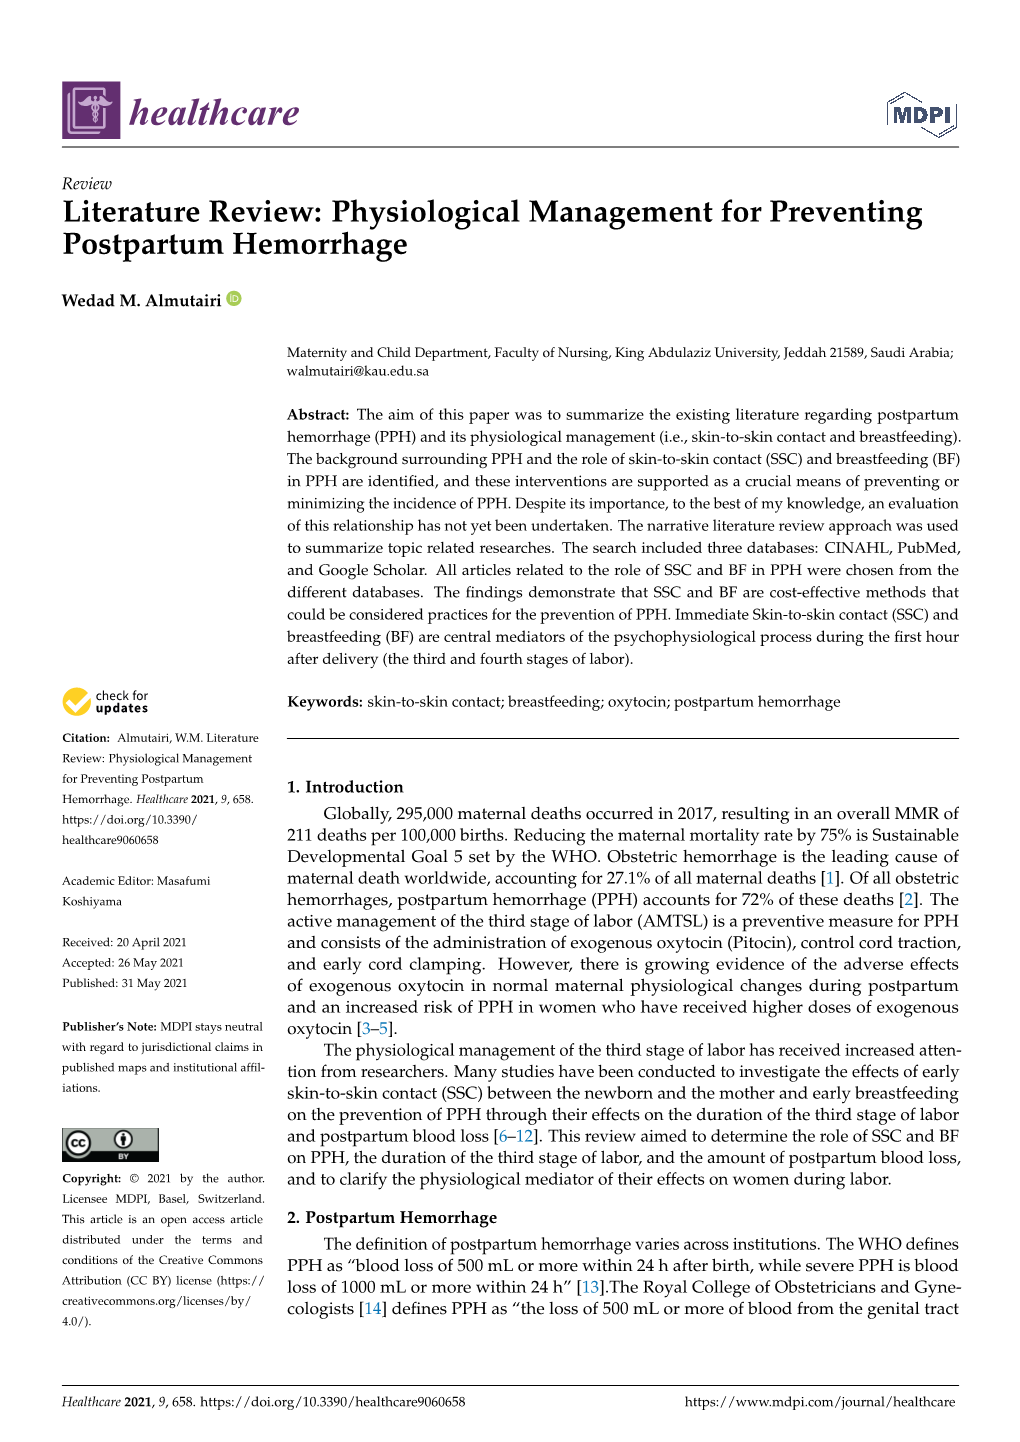 Literature Review: Physiological Management for Preventing Postpartum Hemorrhage